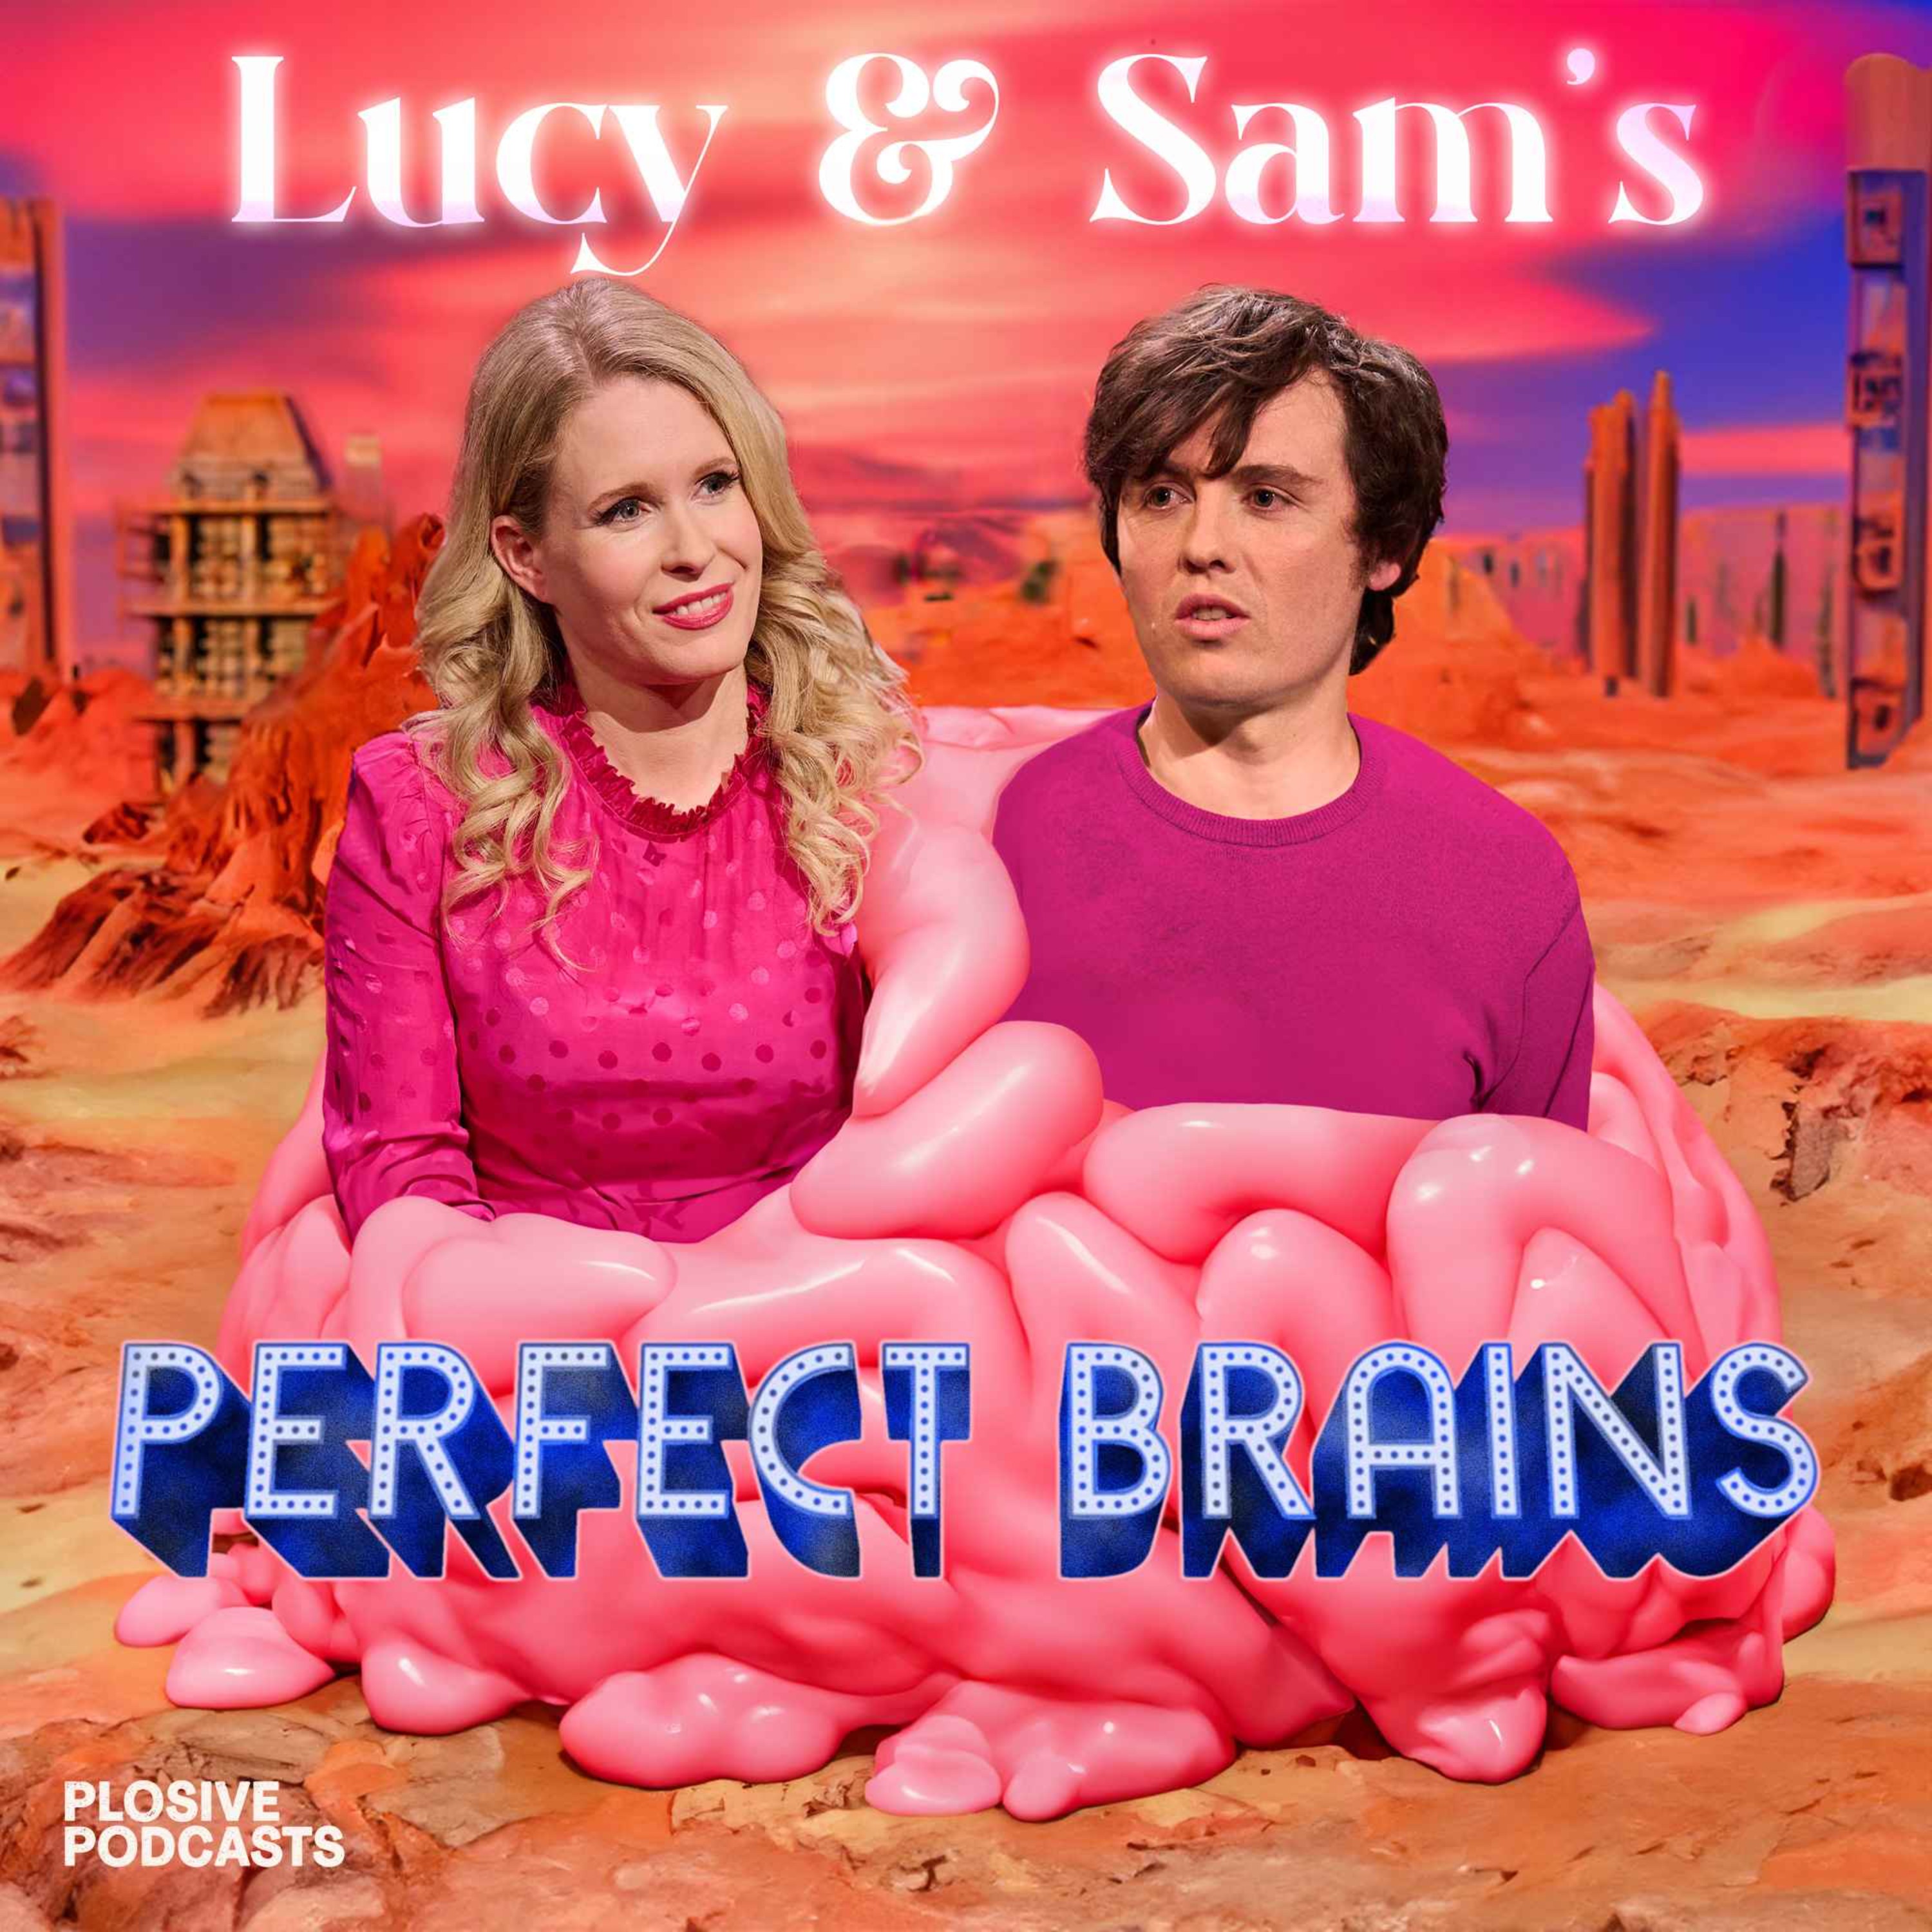 Lucy &amp; Sam&#039;s Perfect Brains